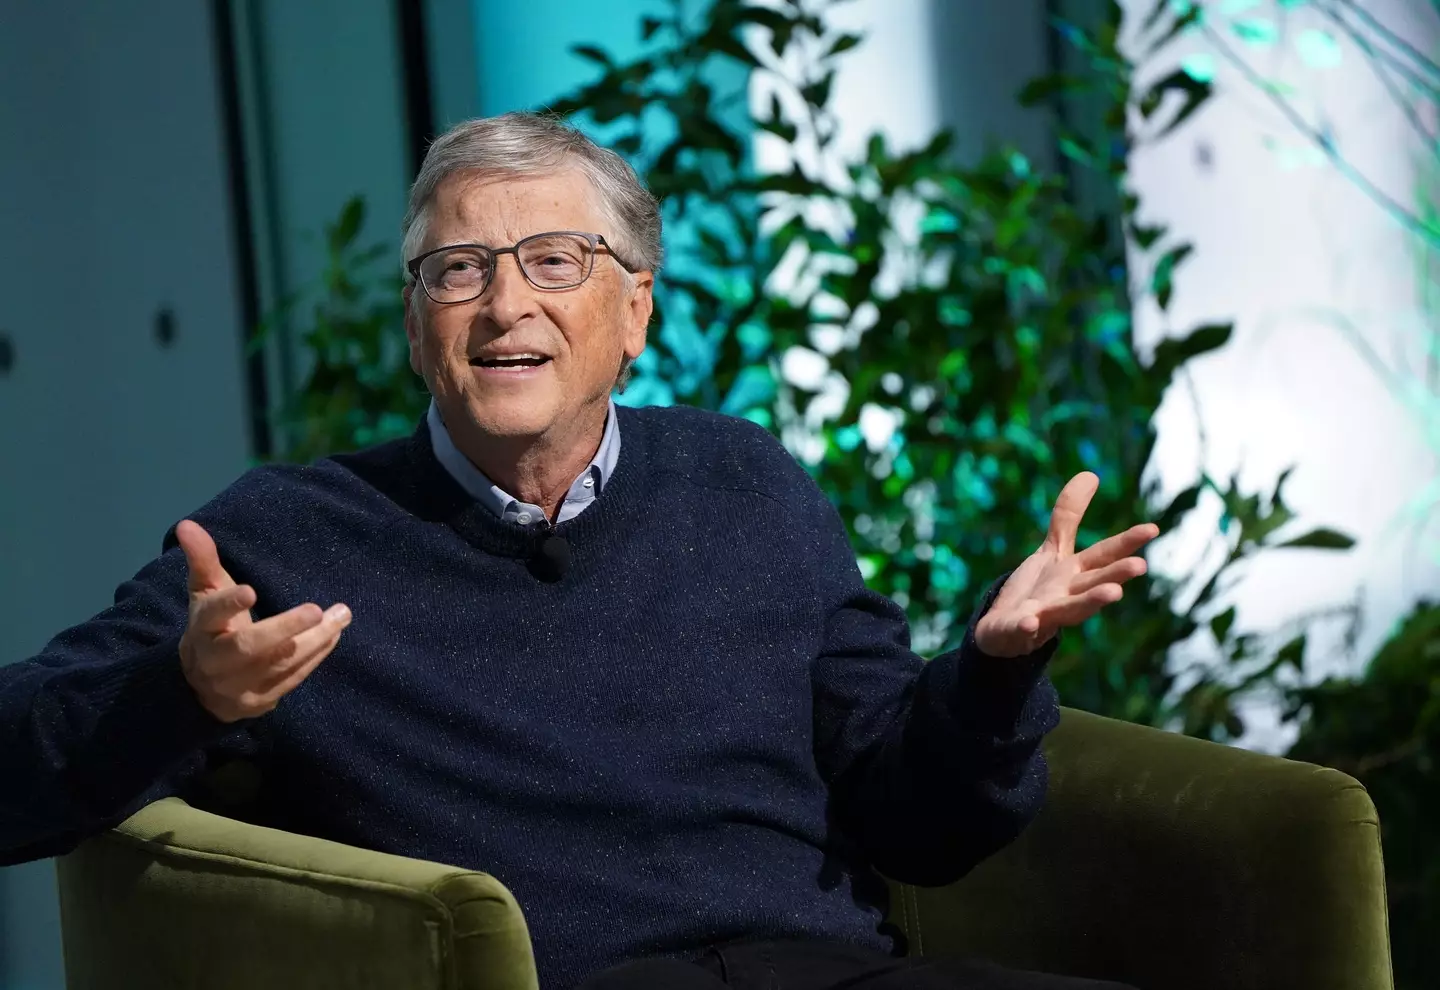 Bill Gates strikes the perfect balance between optimism and pessimism, says a psychologist.